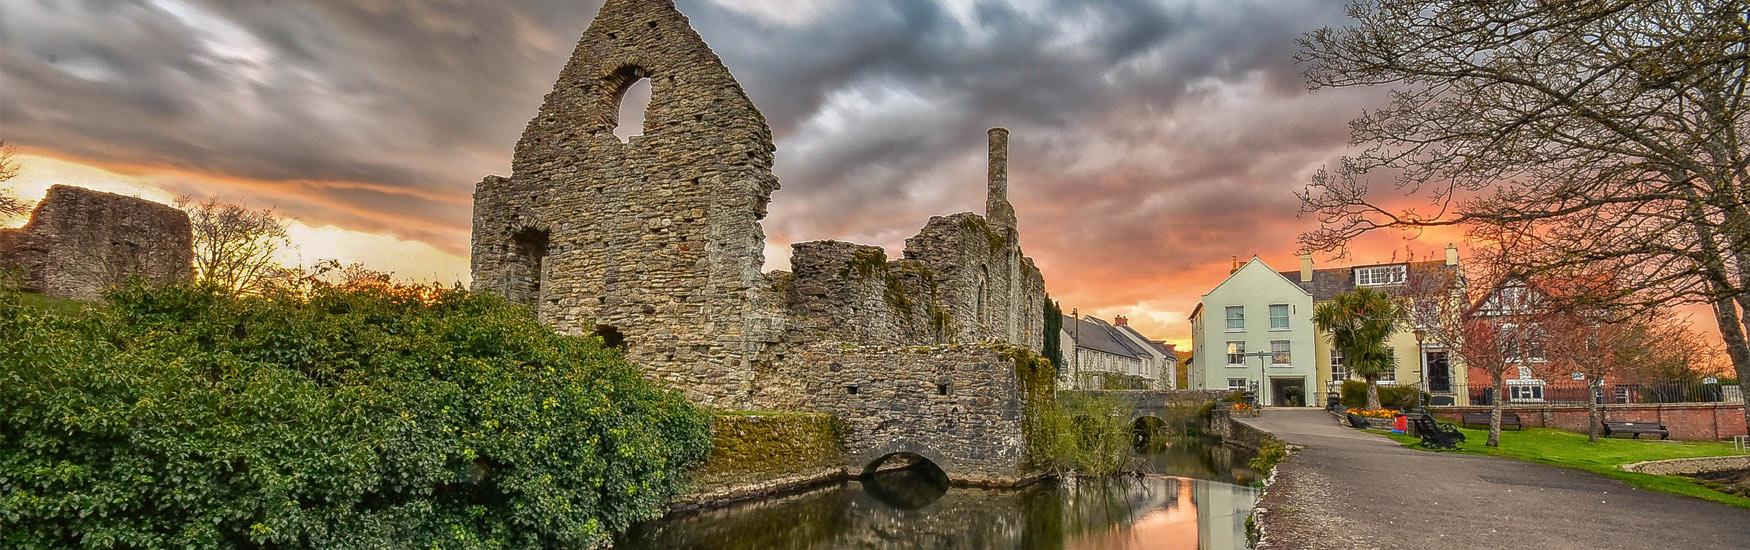 Beautiful image in Christchurch showing the River and Norman House Ruins